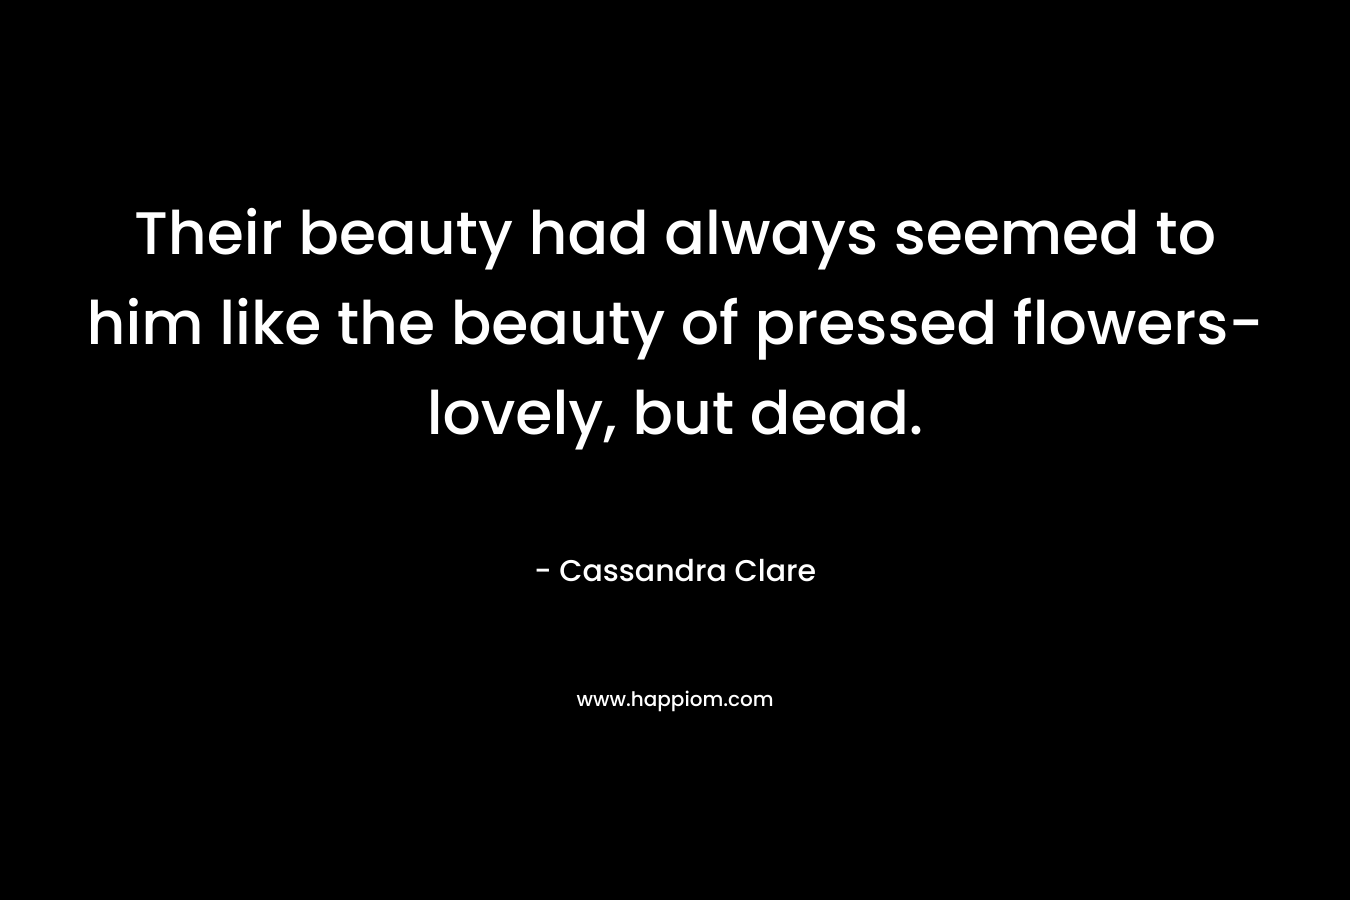 Their beauty had always seemed to him like the beauty of pressed flowers-lovely, but dead.